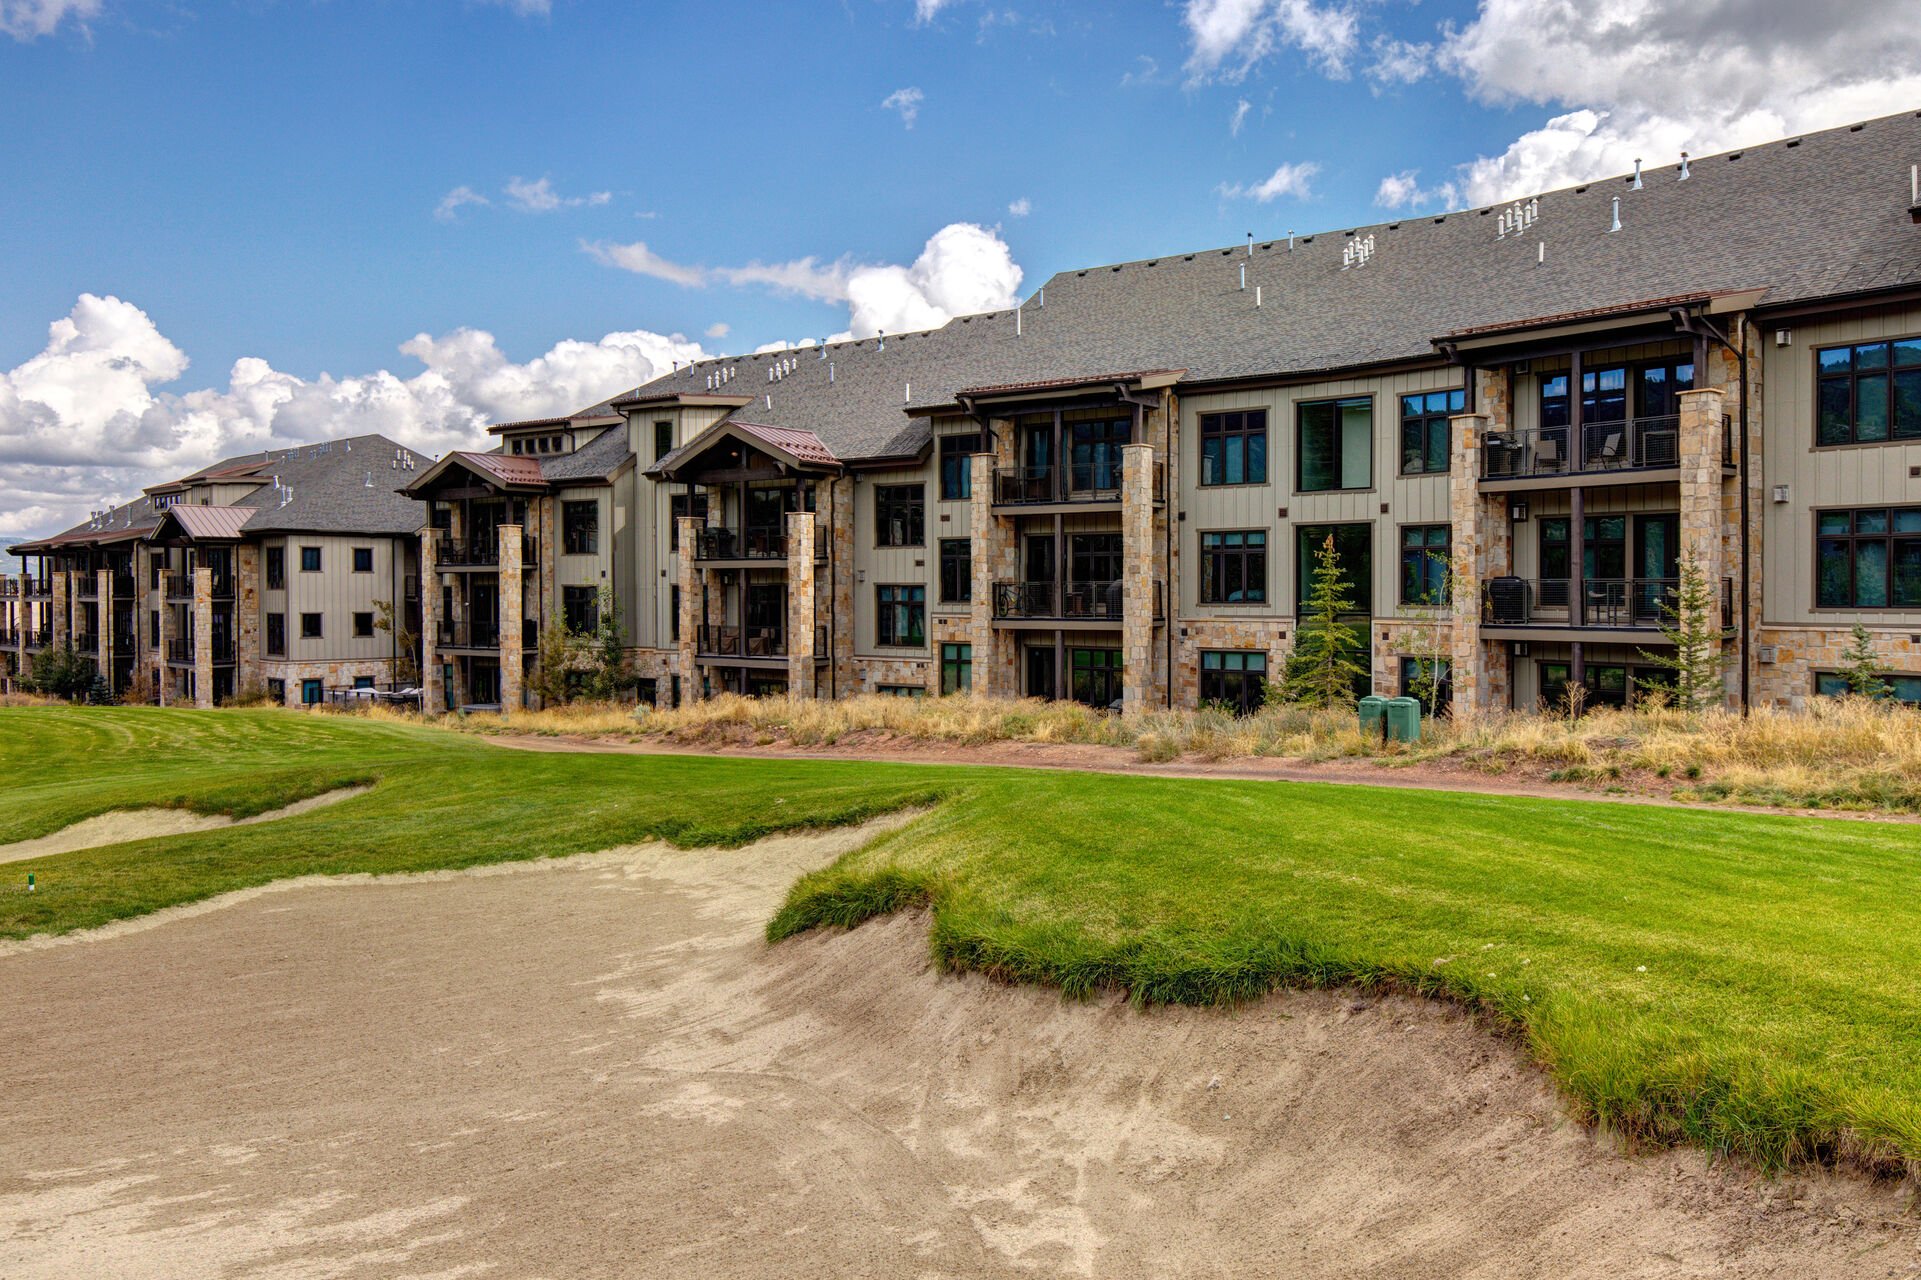 Blackstone is situated on the Canyons Golf course